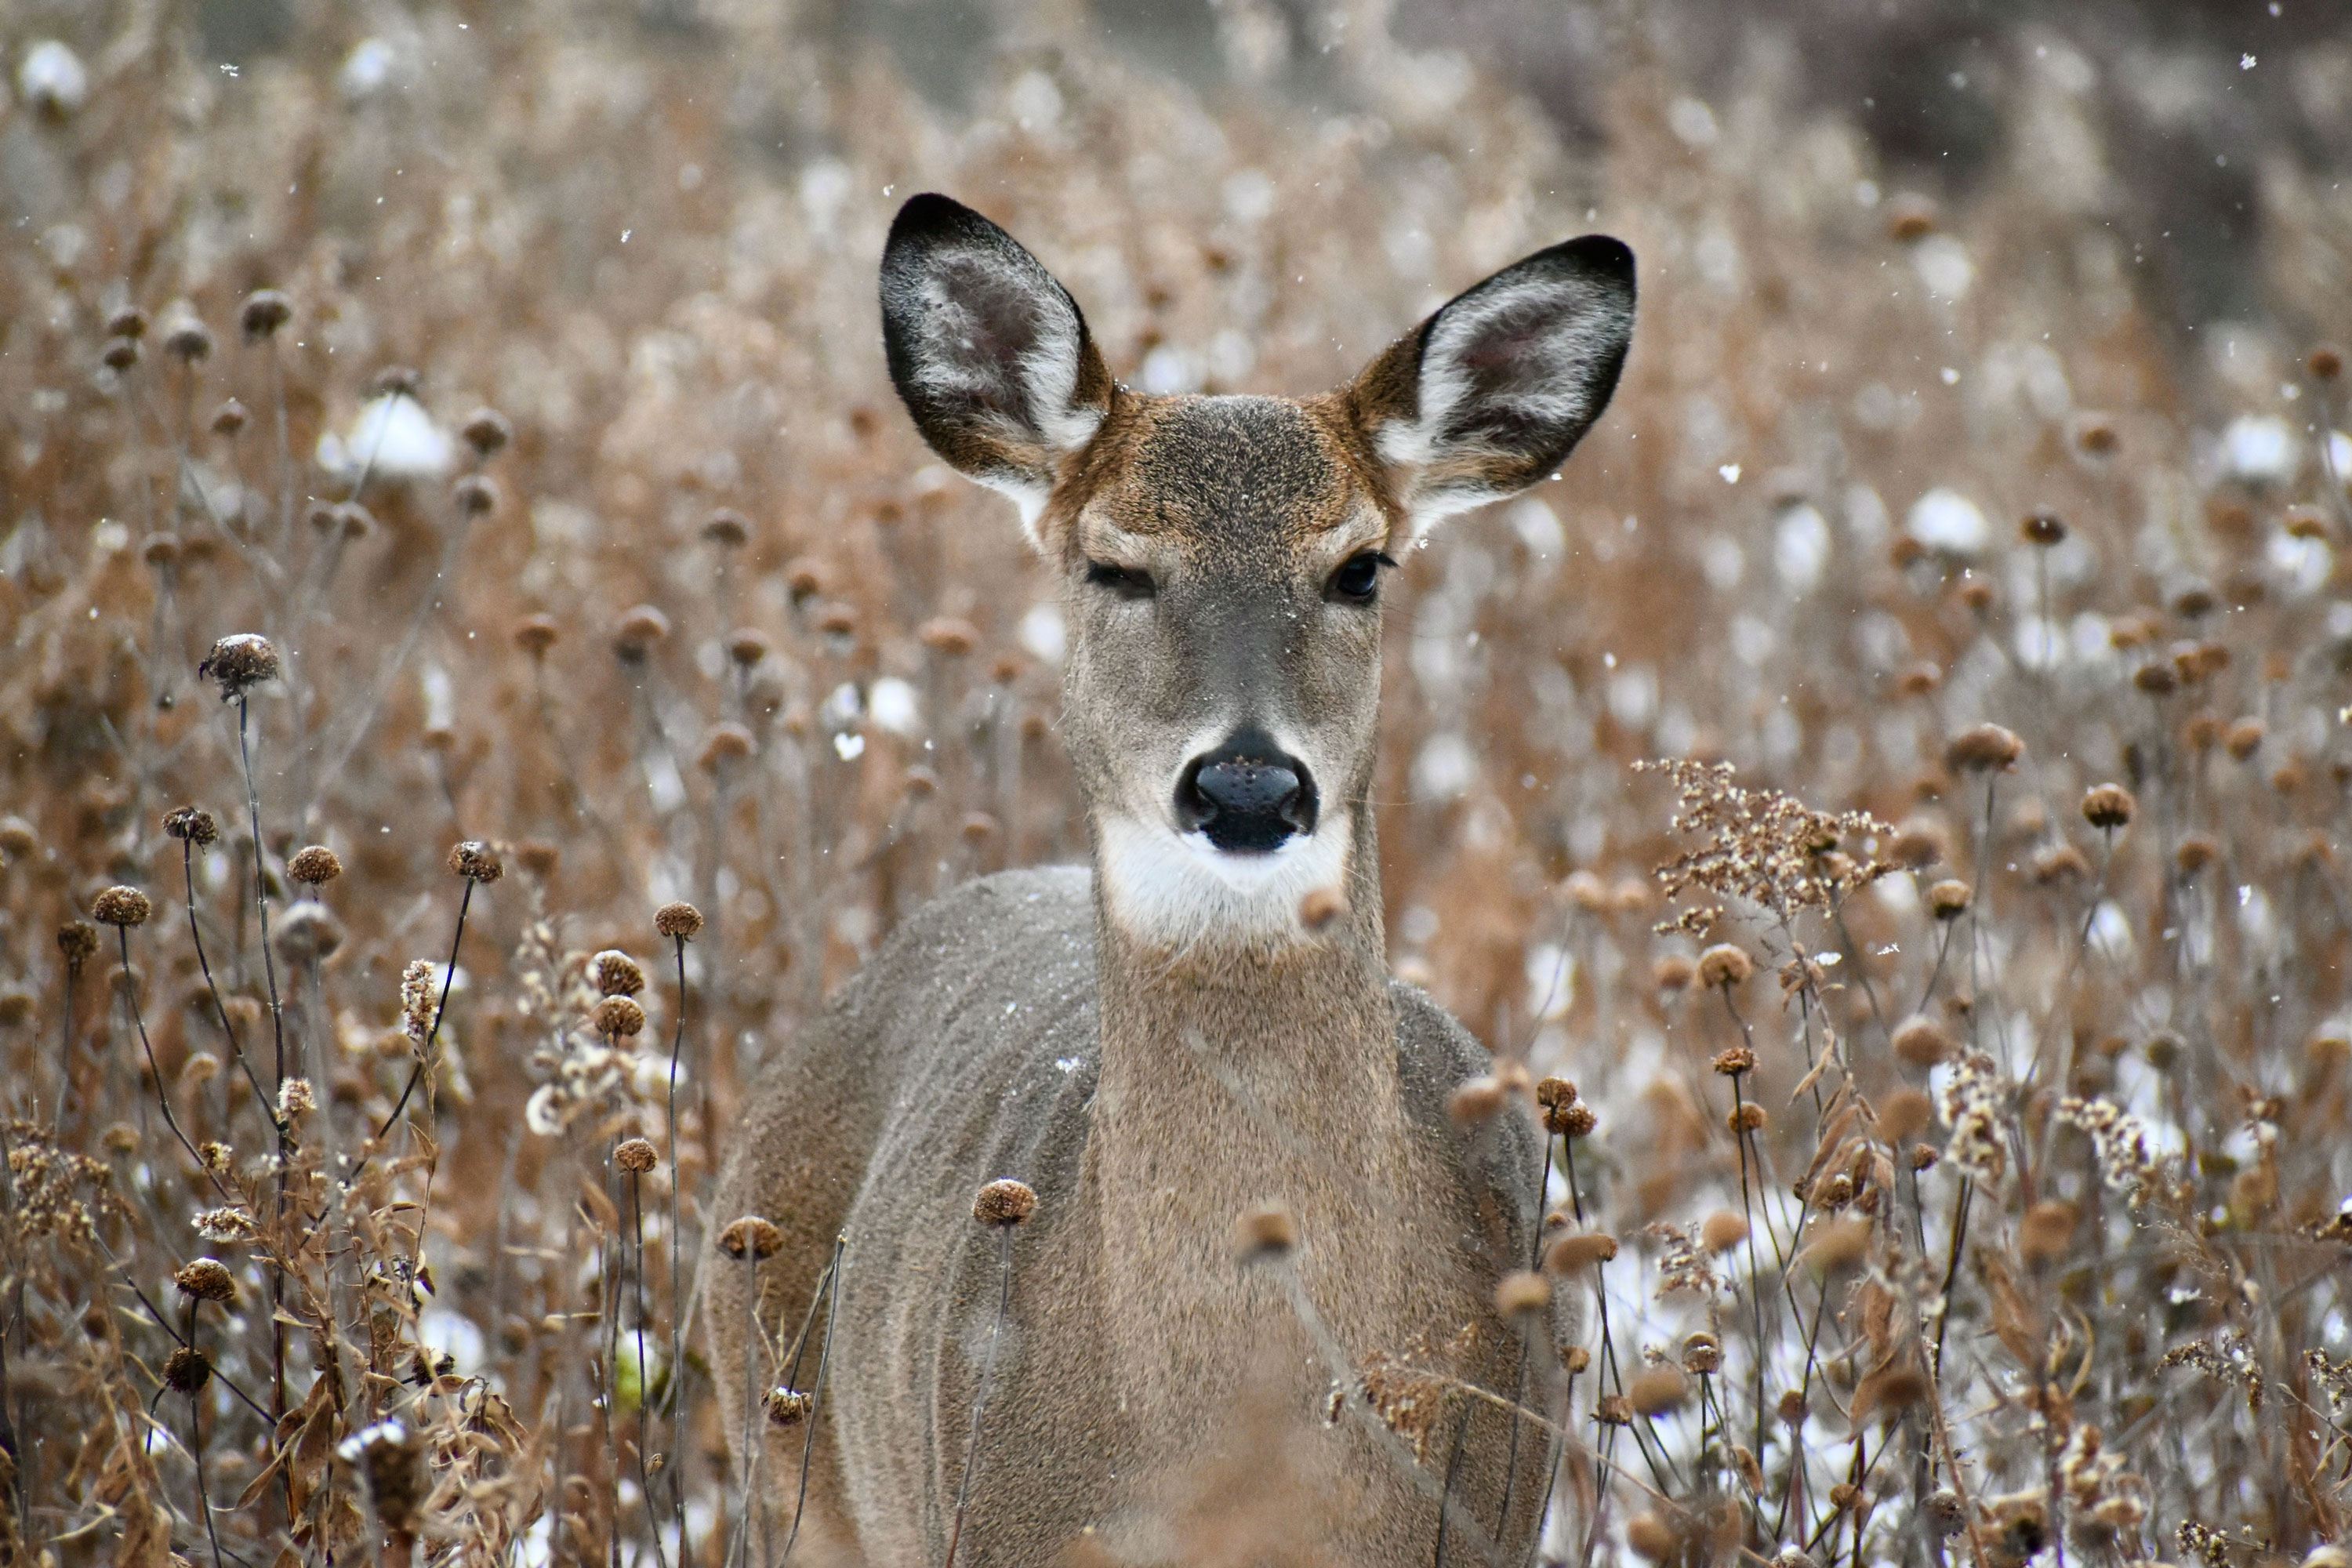 A deer standing in a field looking at the camera.